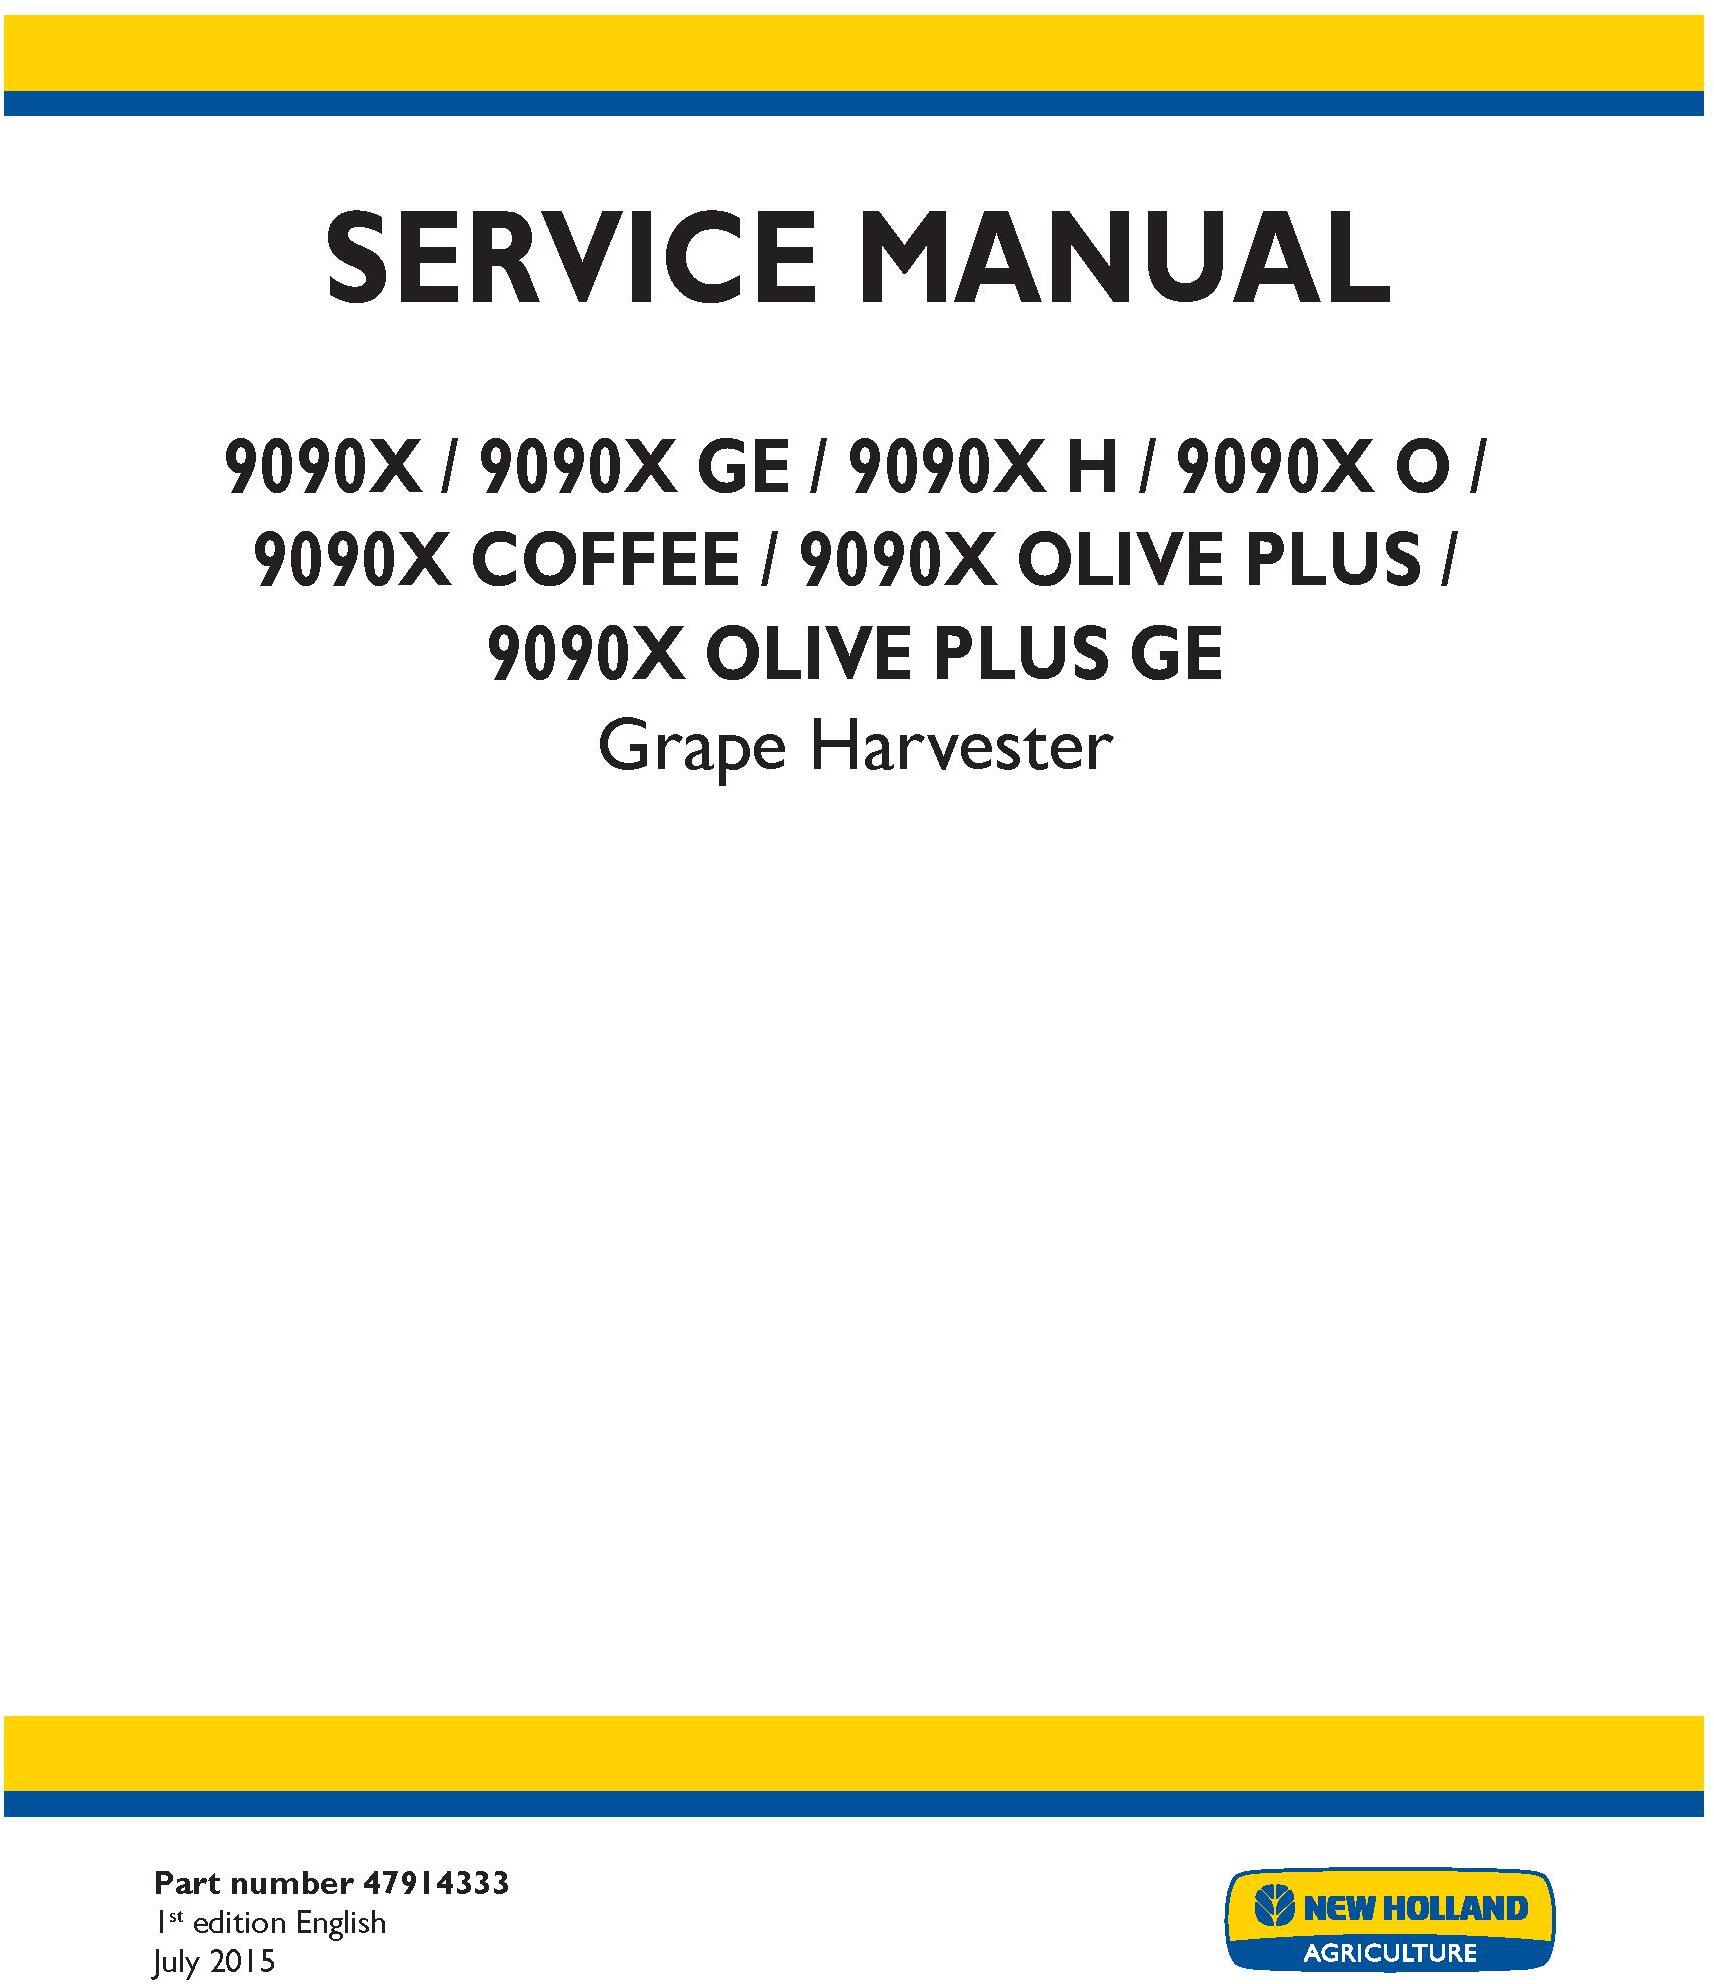 New Holland 9090X (GE,H,O,Coffee, Olive Plus, Olive Plus GE) Grape Harvester Complete Service Manual - 19770